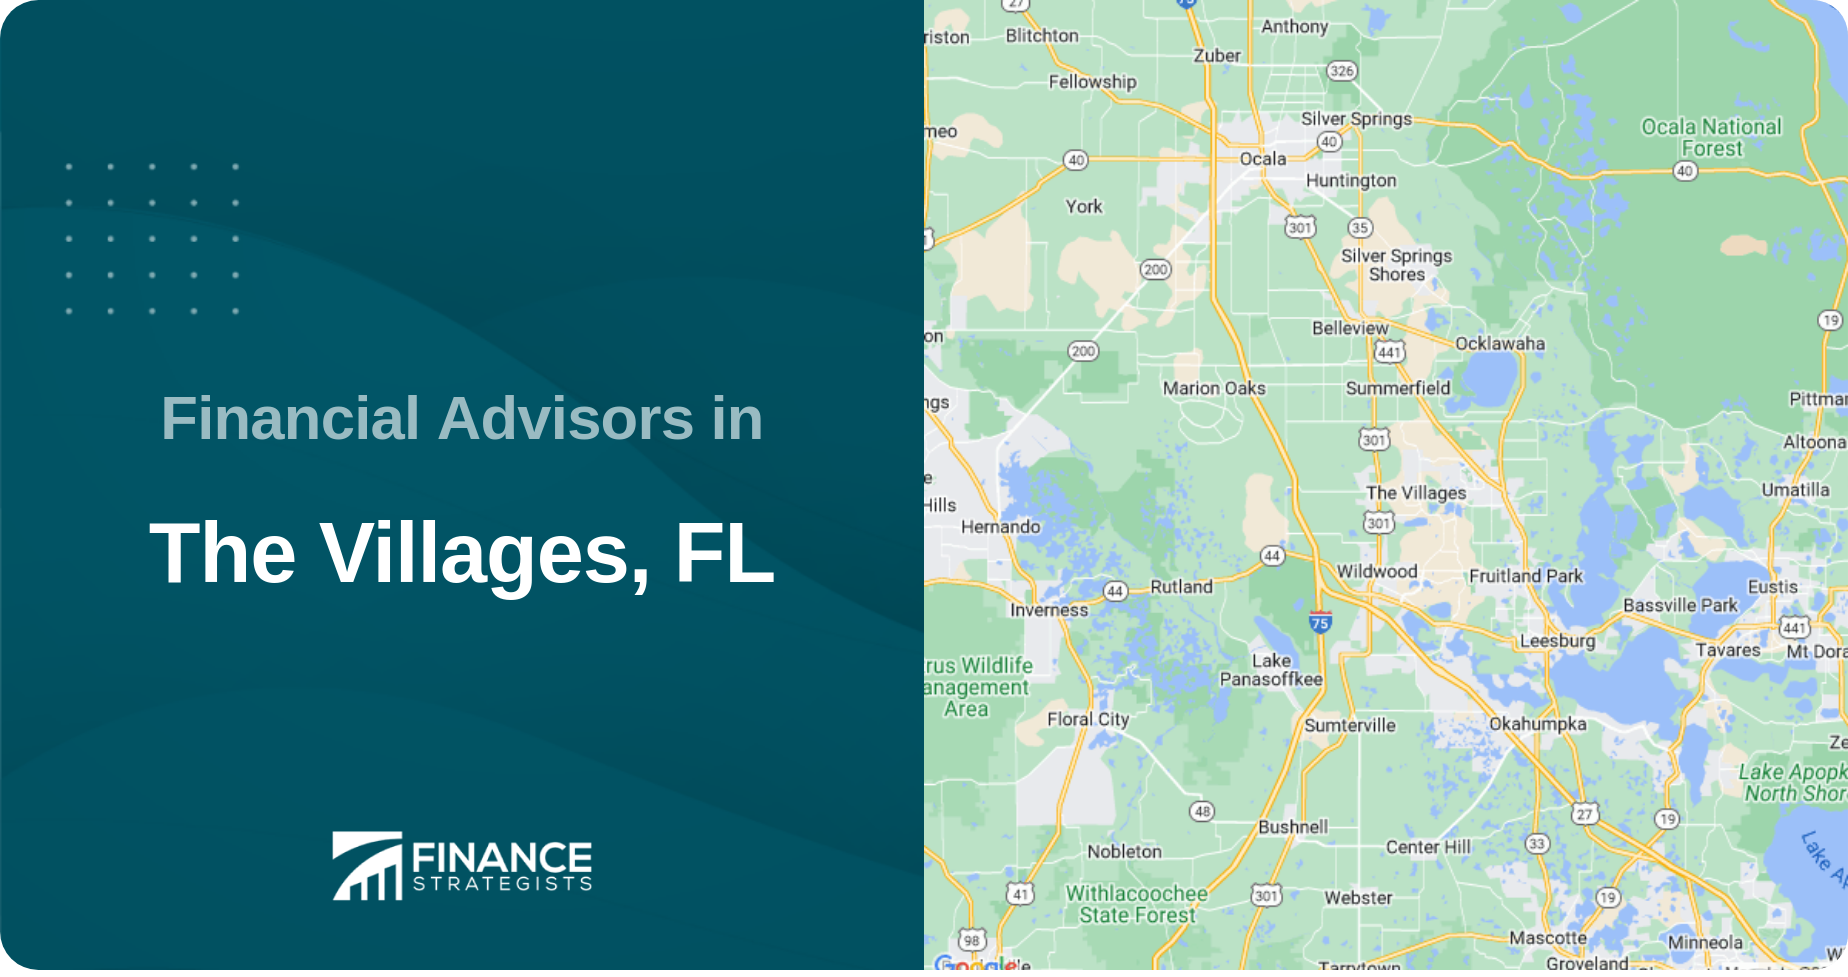 Financial Advisors in The Villages, FL